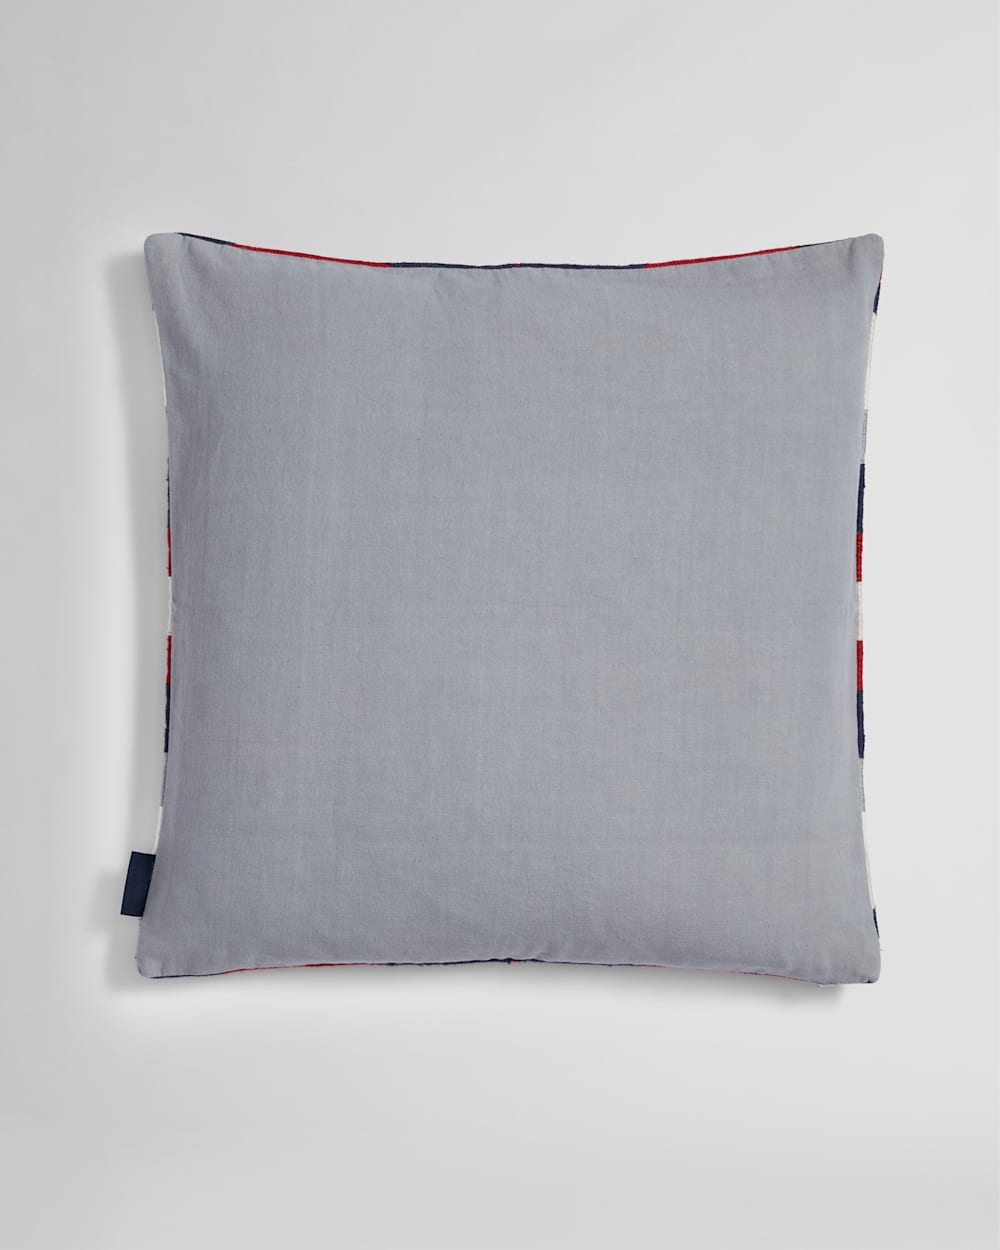 ALTERNATE VIEW OF TECOPA HILLS EMBROIDERED SQUARE PILLOW IN GREY image number 3